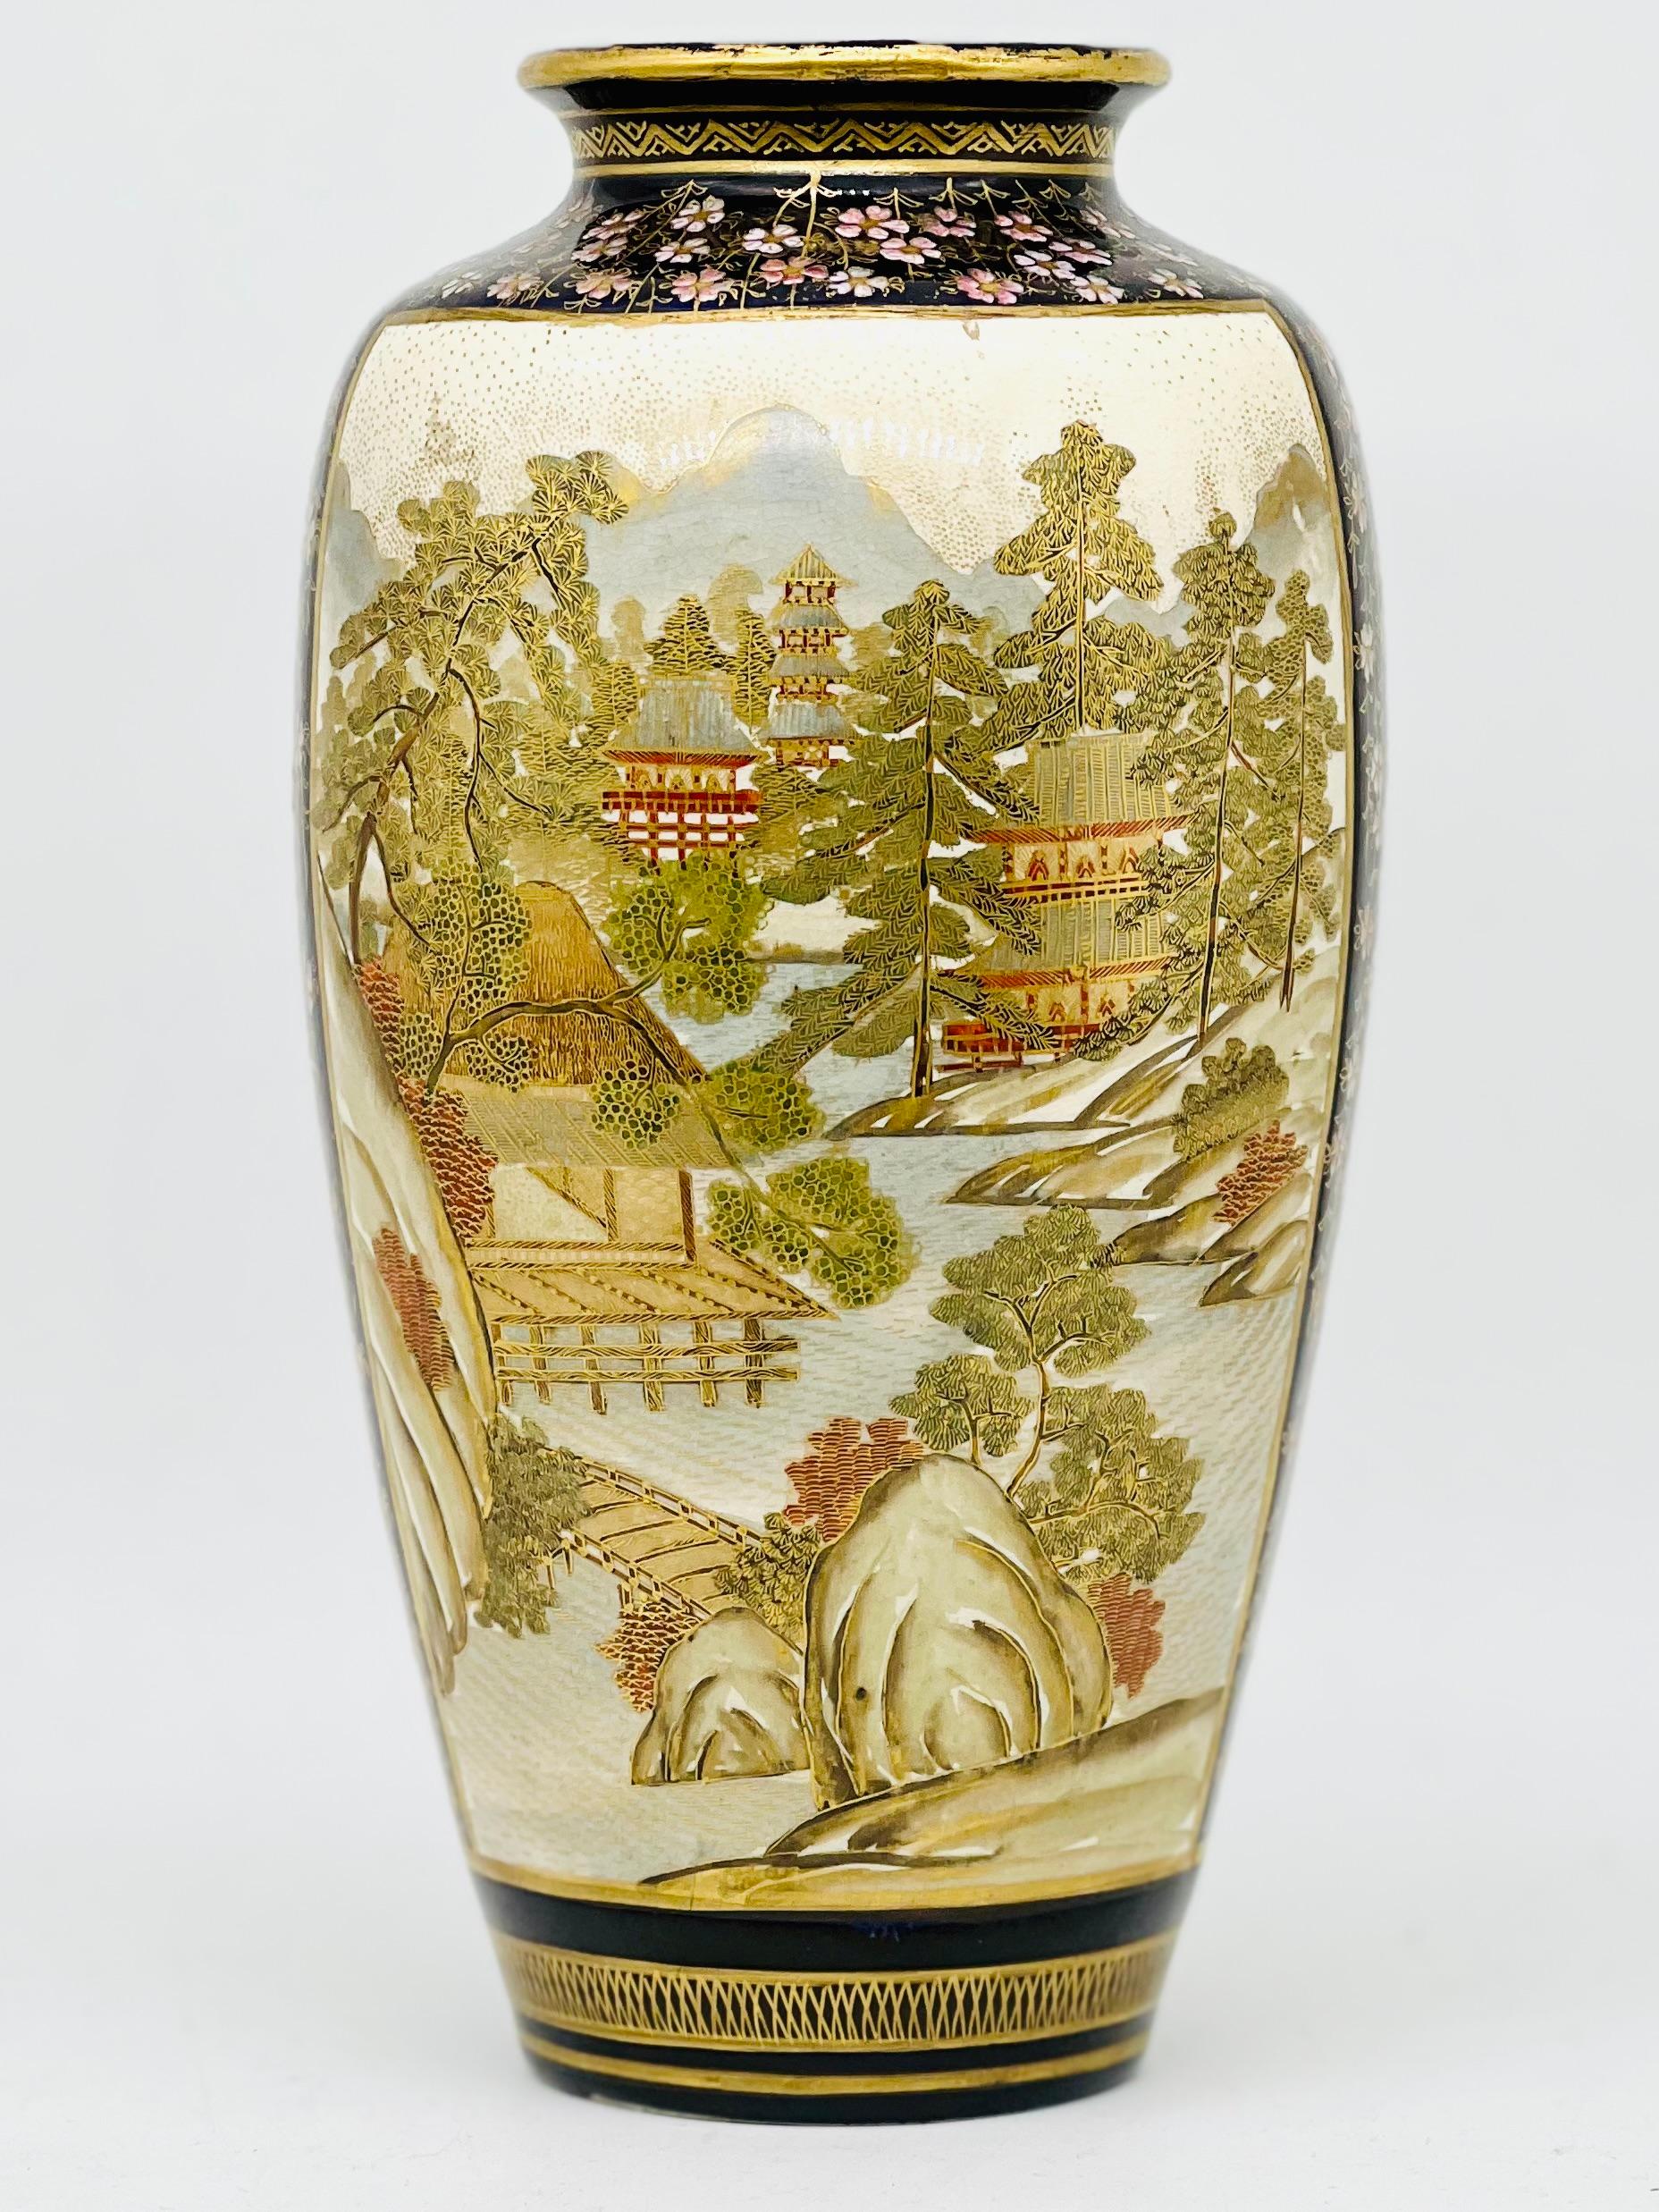 A magnificent Japanese Satsuma Vase of a slender ovoid form decorated with an extensive landscape and chickens amongst a bamboo trees.

Signed by Kinkozan. Meiji period. 

Size H. 24.5 cm w 12 cm, diameter to the bottom 8 cm. 

In good condition